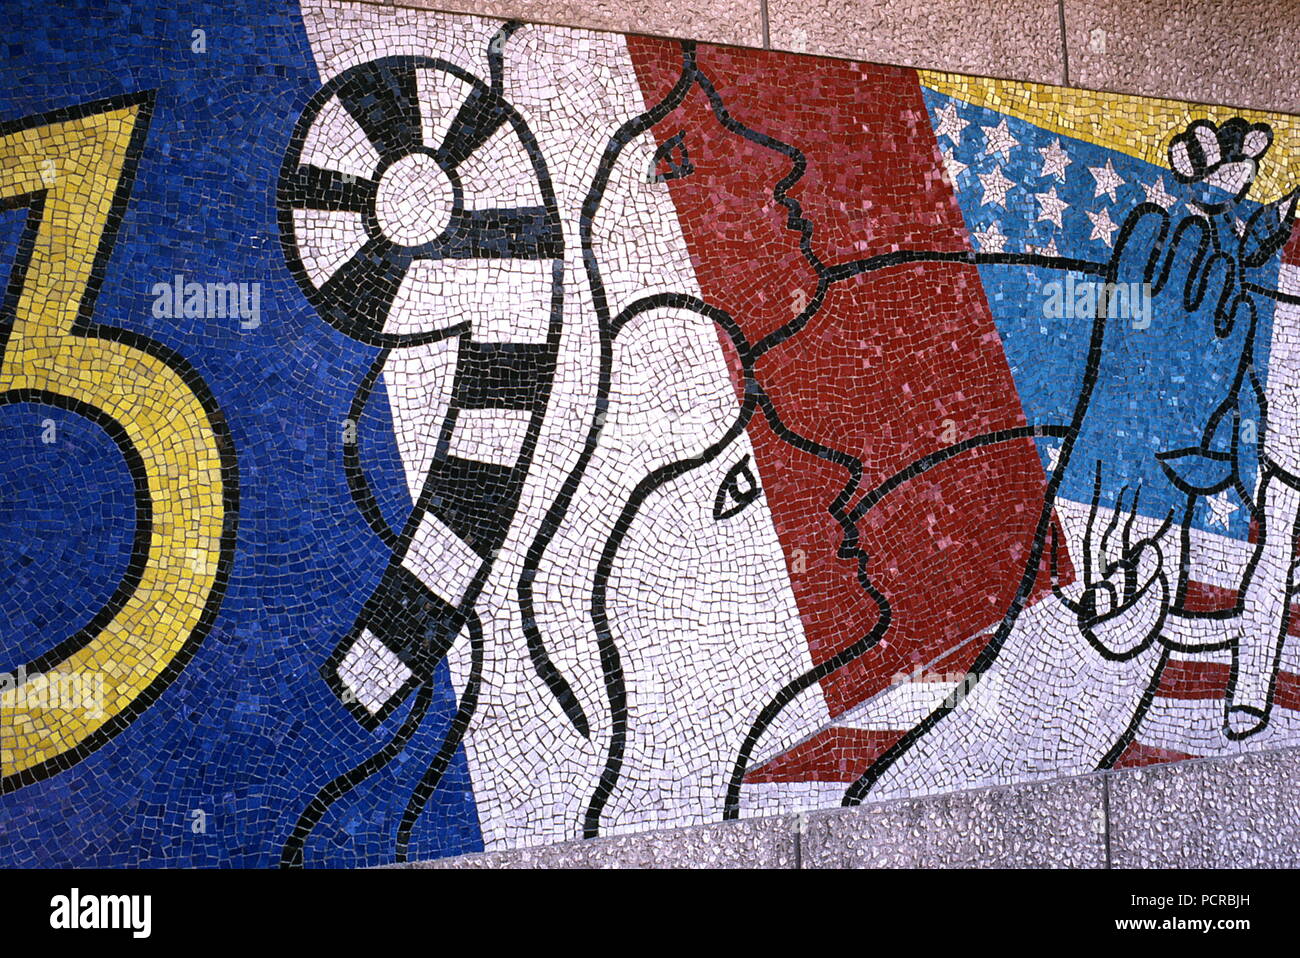 AJAXNETPHOTO. SAINT LO, FRANCE. - LEGER WALL ART - DETAIL OF MOSAIC OF RAVENNA FRESCO BY THE ARTIST FERNAND LEGER AT THE ENTRANCE TO THE HOSPITAL MEMORIAL FRANCE UNITED STATES.  PHOTO:JONATHAN EASTLAND/AJAX REF:960534 Stock Photo